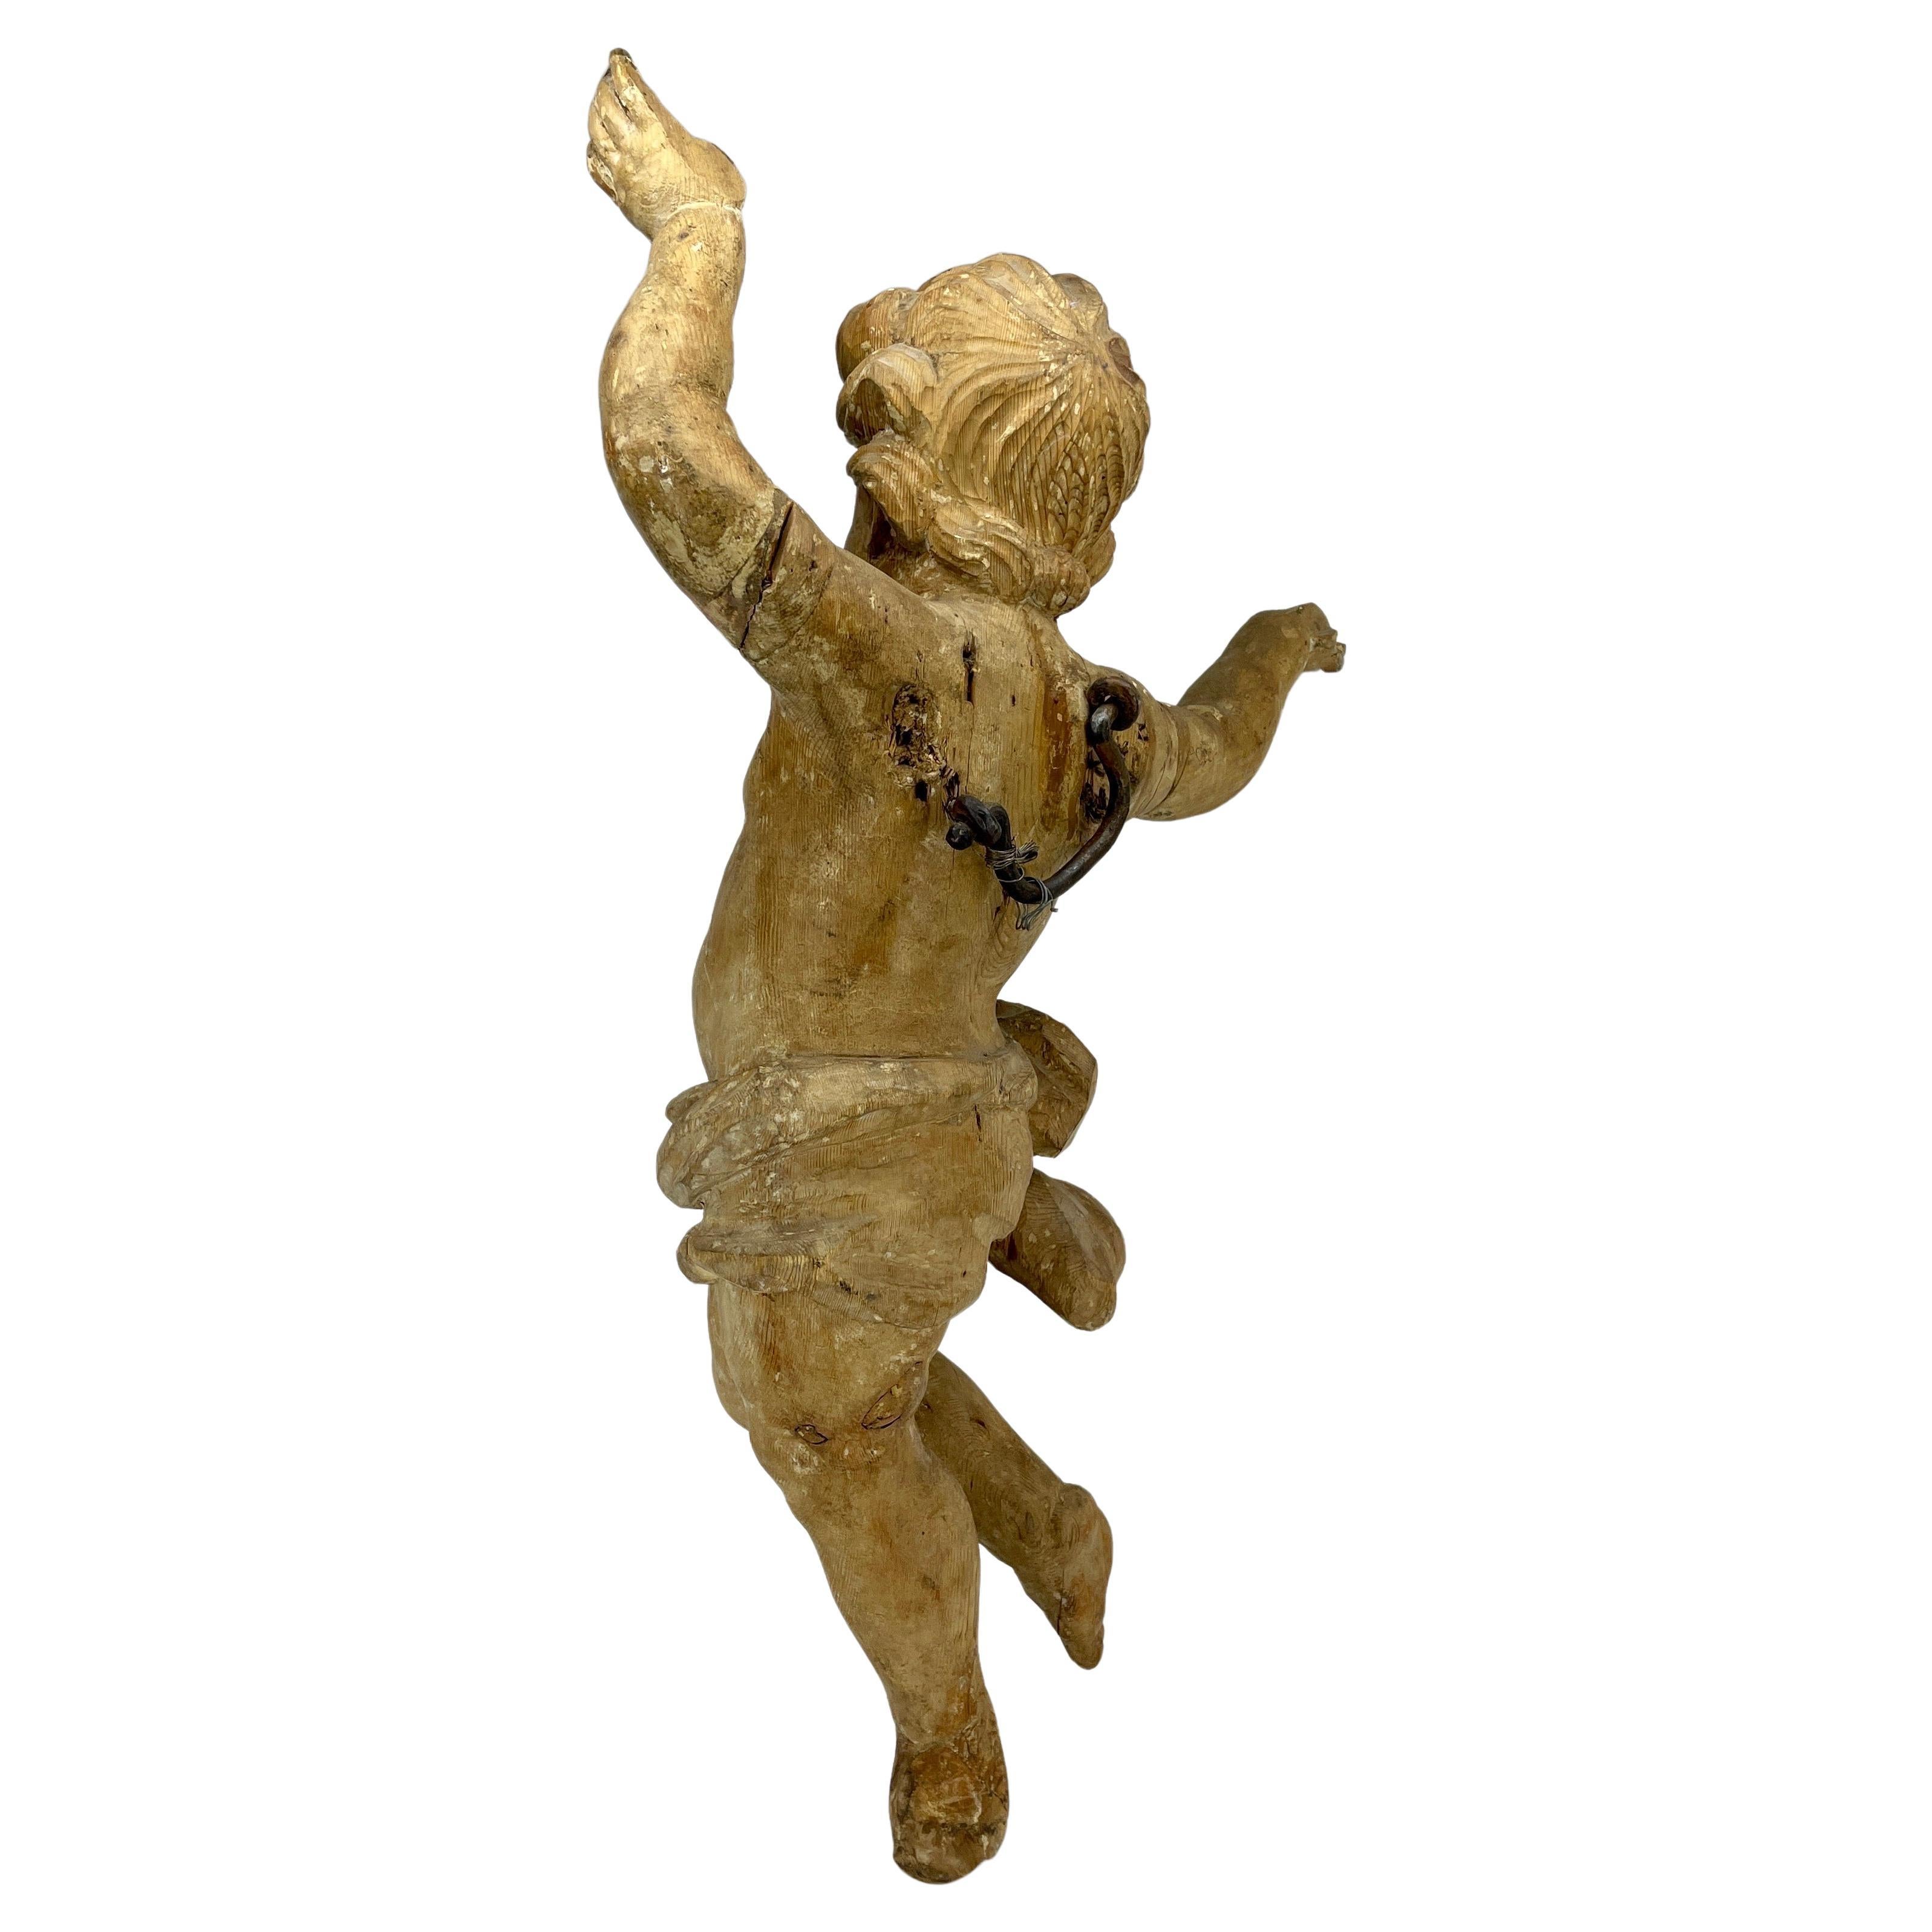 Large Italian Baroque Wall-mounted Sculpture, Hand Carved Oak Angel Putti Figure, circa 1680-1750.
Decorative hand carved cherub with tremendous character and charm having kept its original patina. Intricate details in the angel’s hair, hands and